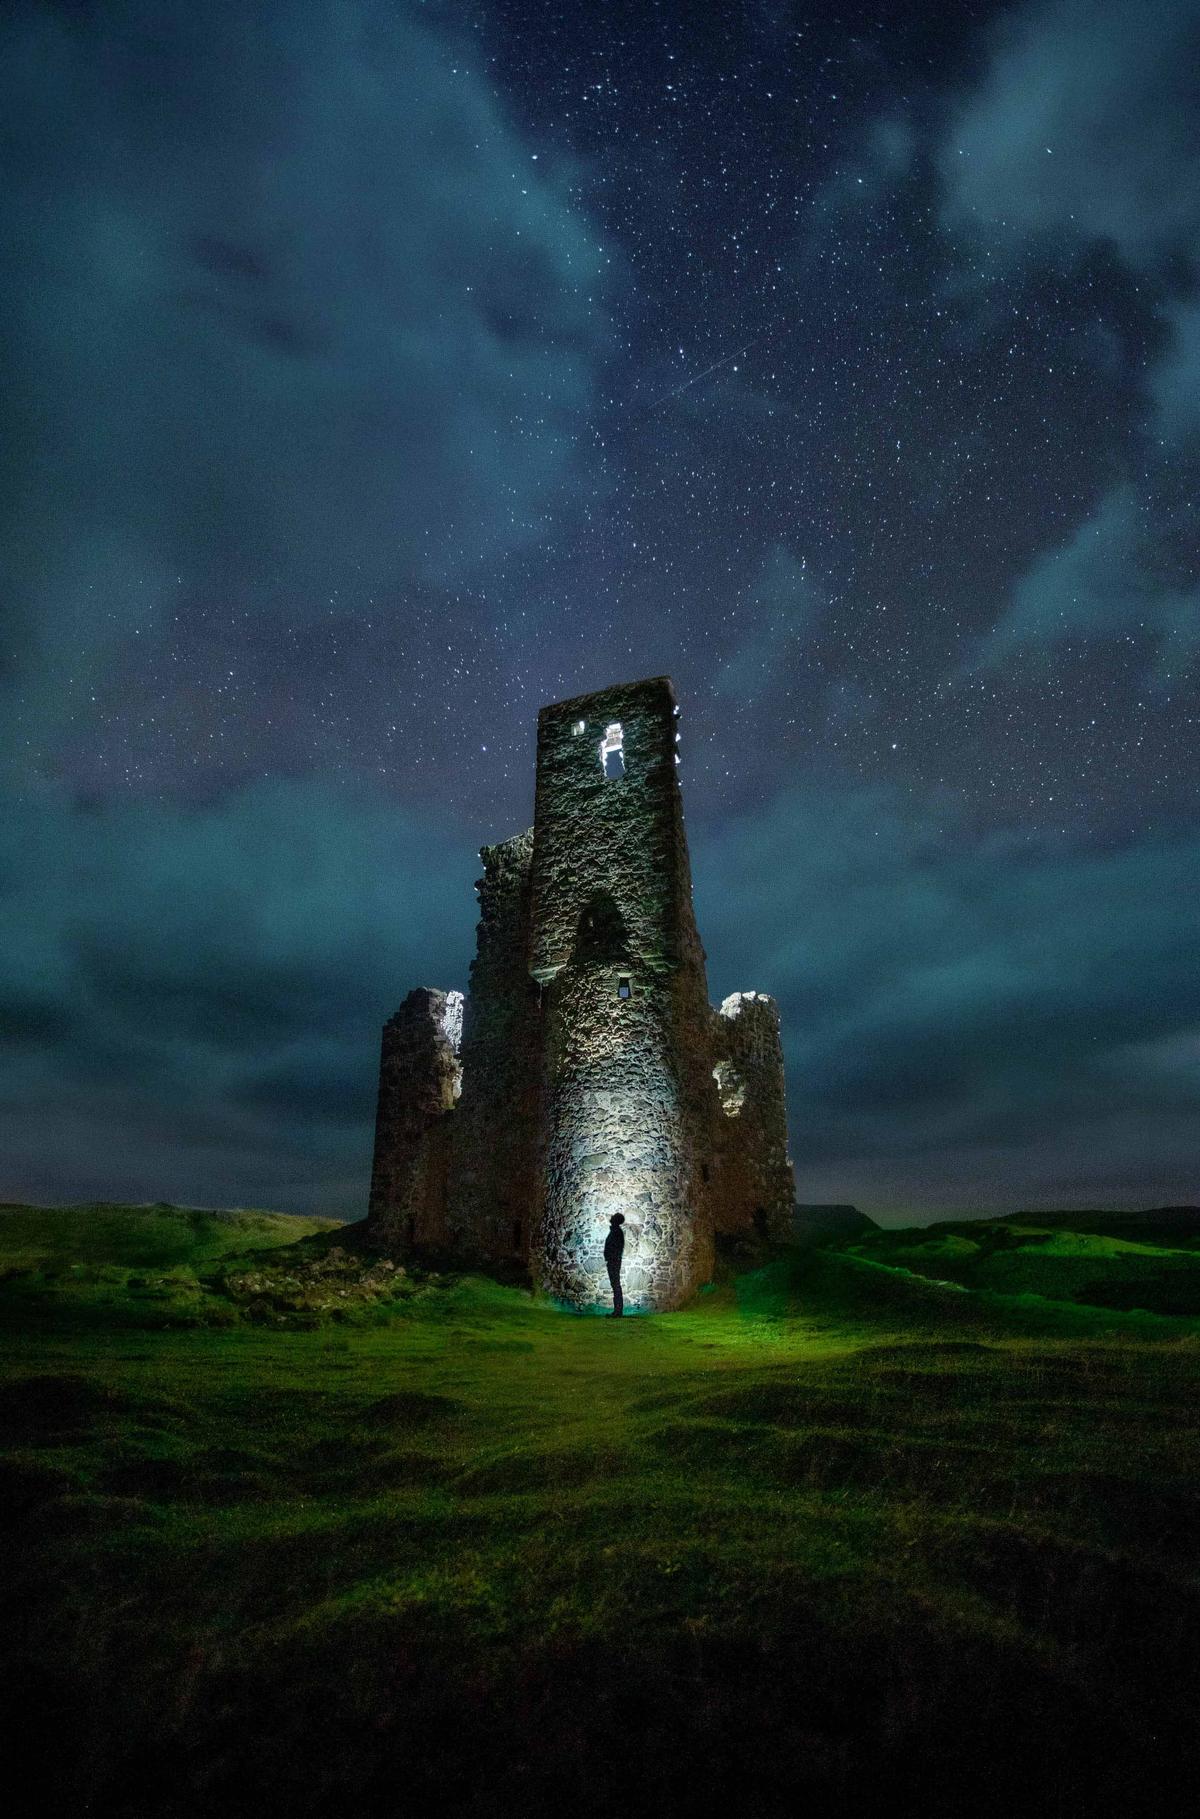 A self-portrait of Paul Zizka at Ardvreck Castle in Scotland (Caters News)